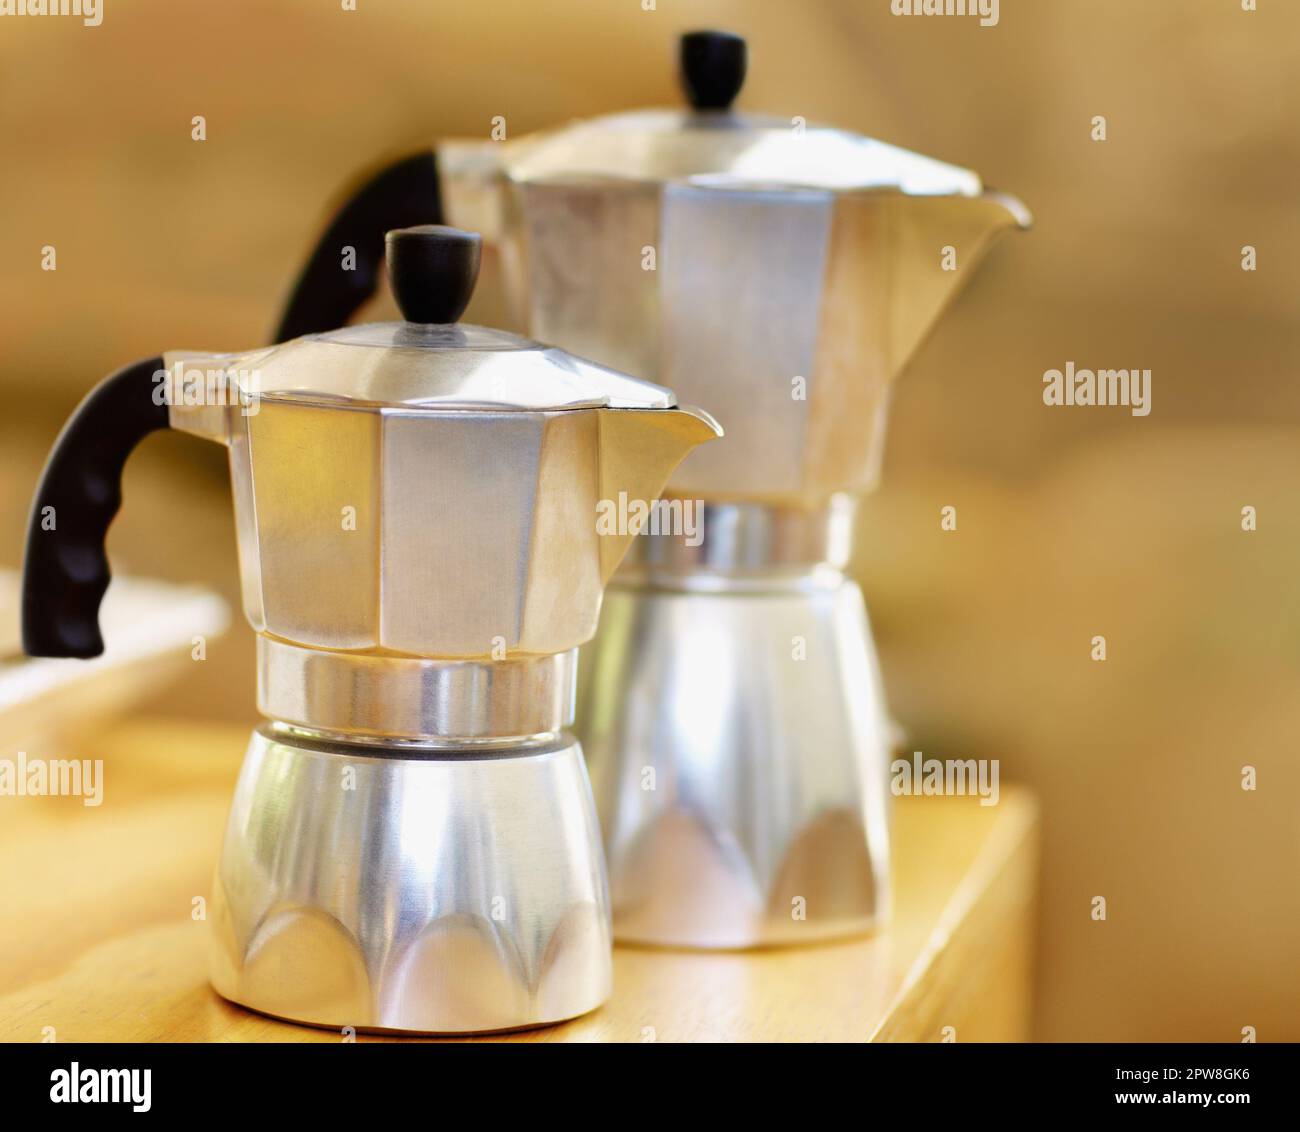 https://c8.alamy.com/comp/2PW8GK6/coffee-espresso-and-hot-drink-boiler-for-brewing-fresh-morning-beverages-or-traditional-italian-style-moka-pot-for-caffeine-kitchen-appliance-and-2PW8GK6.jpg